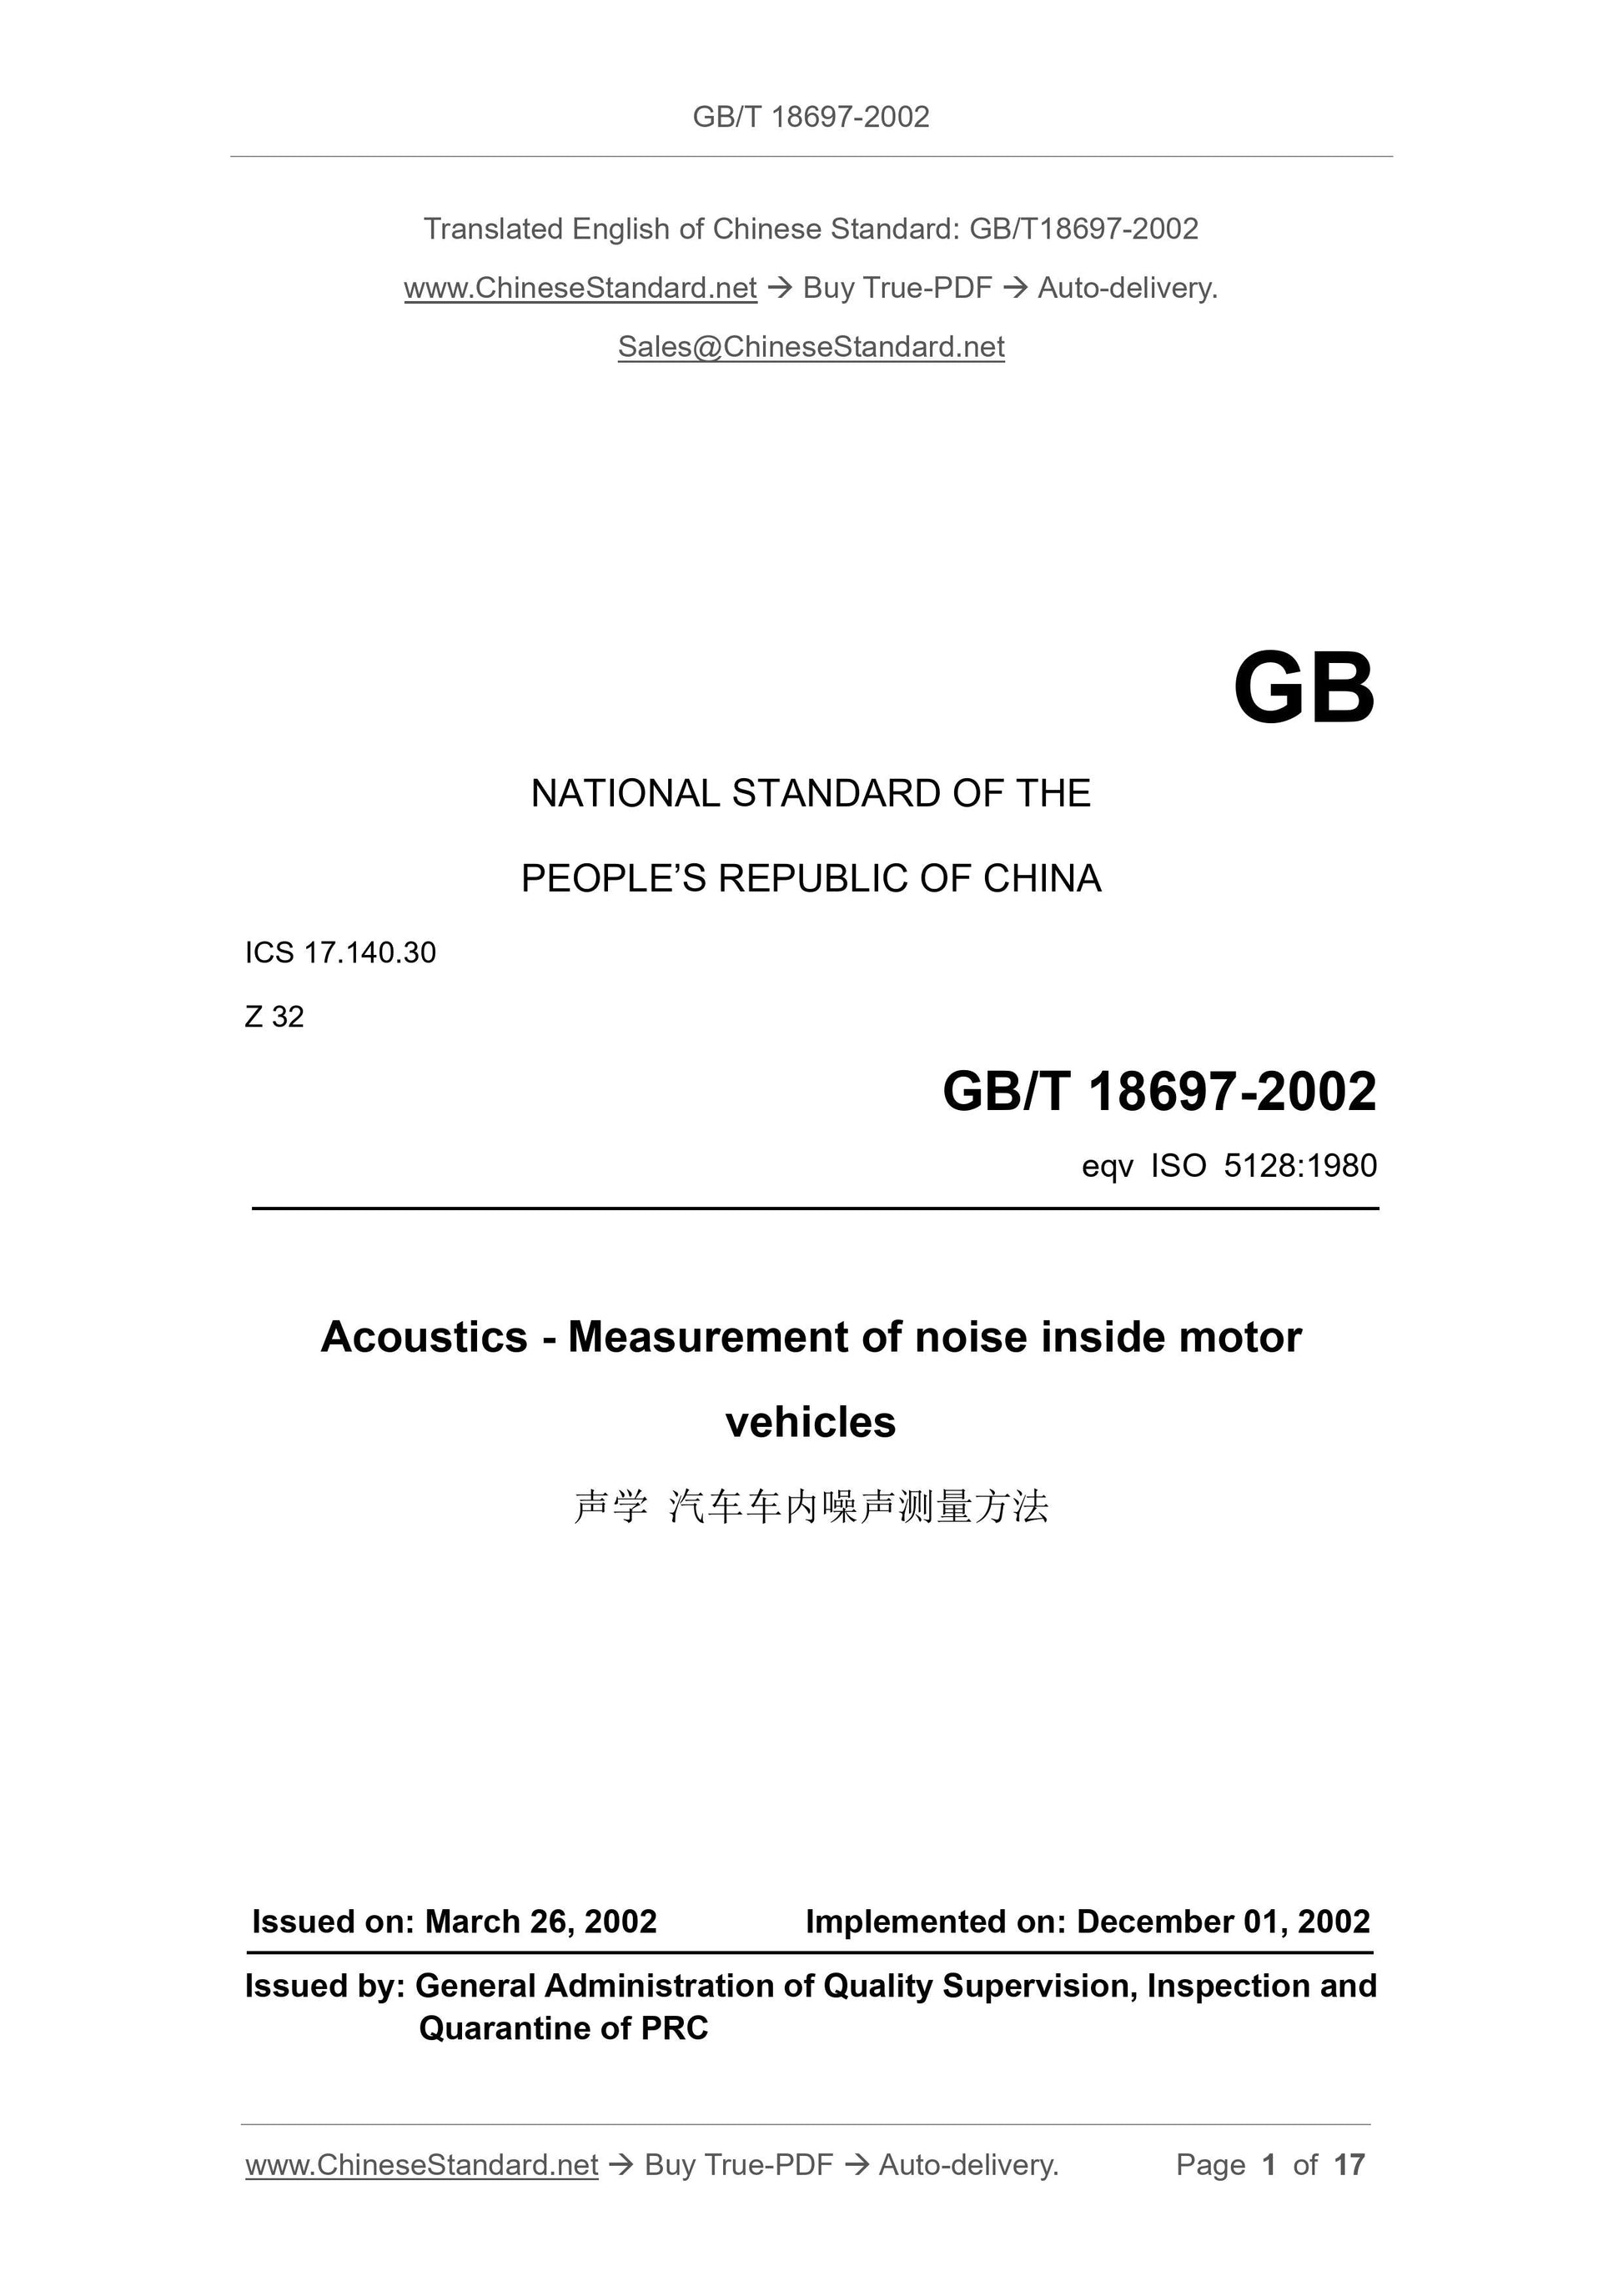 GB/T 18697-2002 Page 1